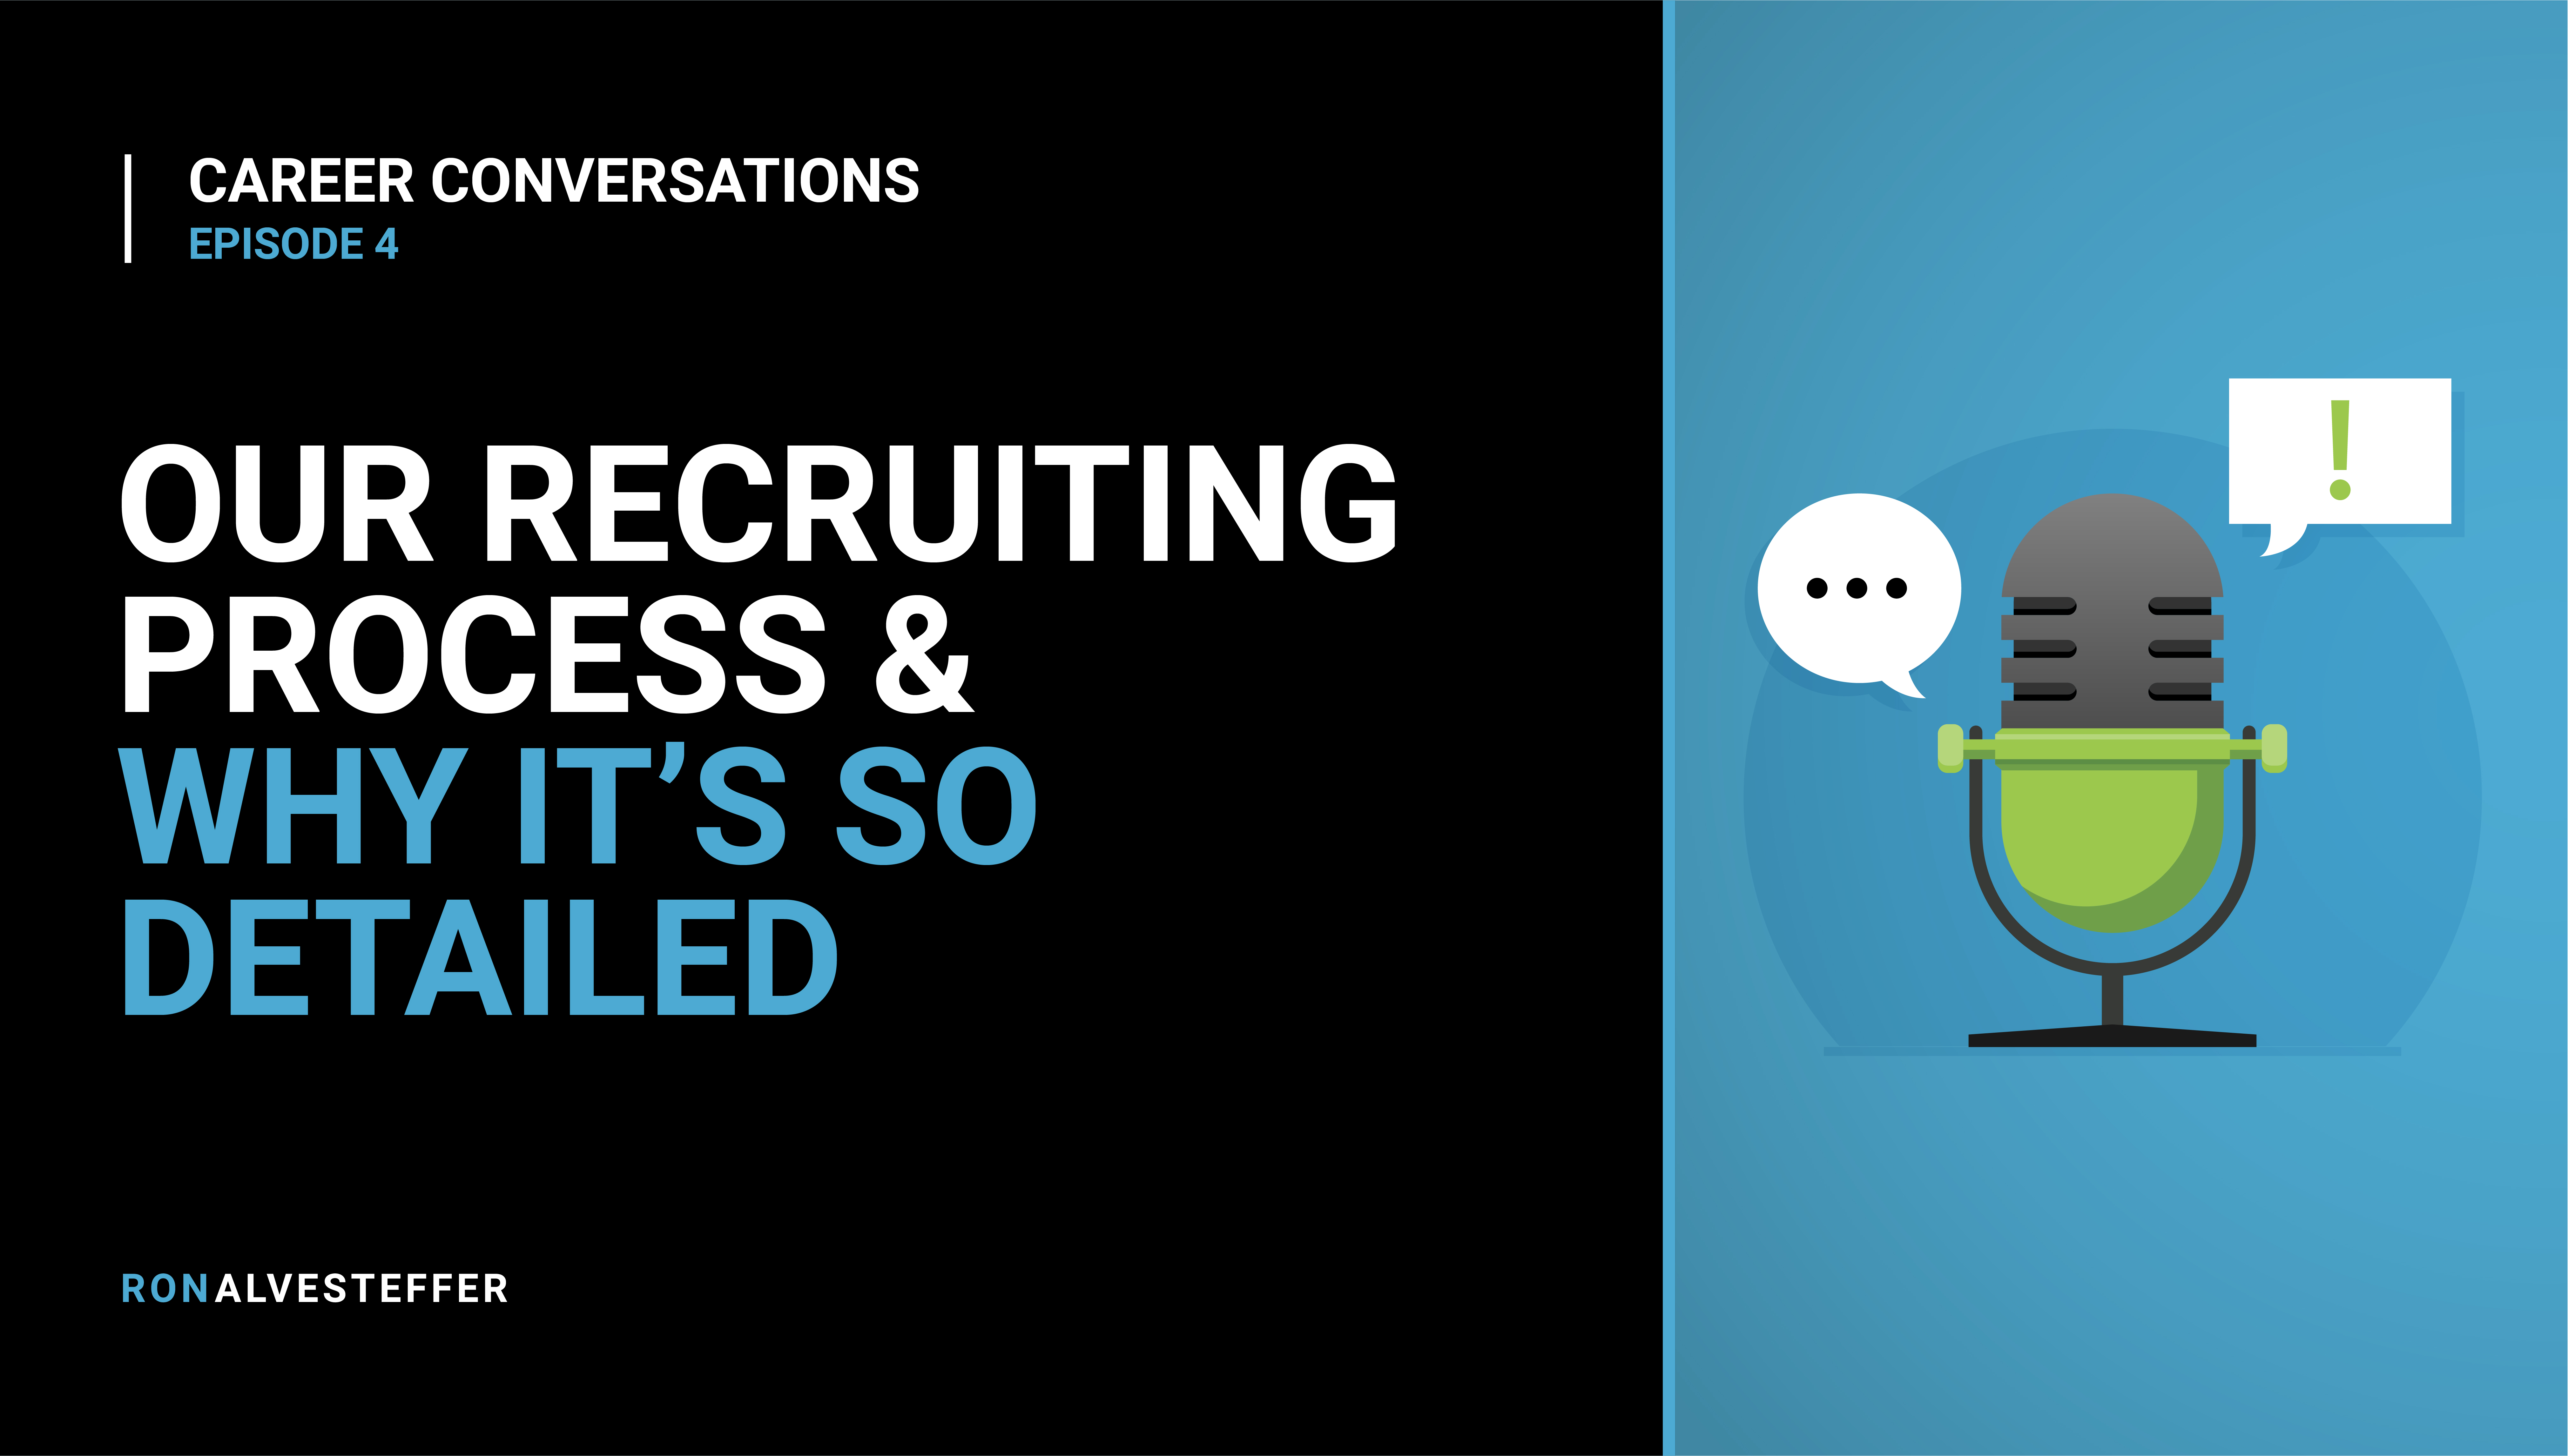 Career Conversations: Our Recruiting Process & Why It’s So Detailed